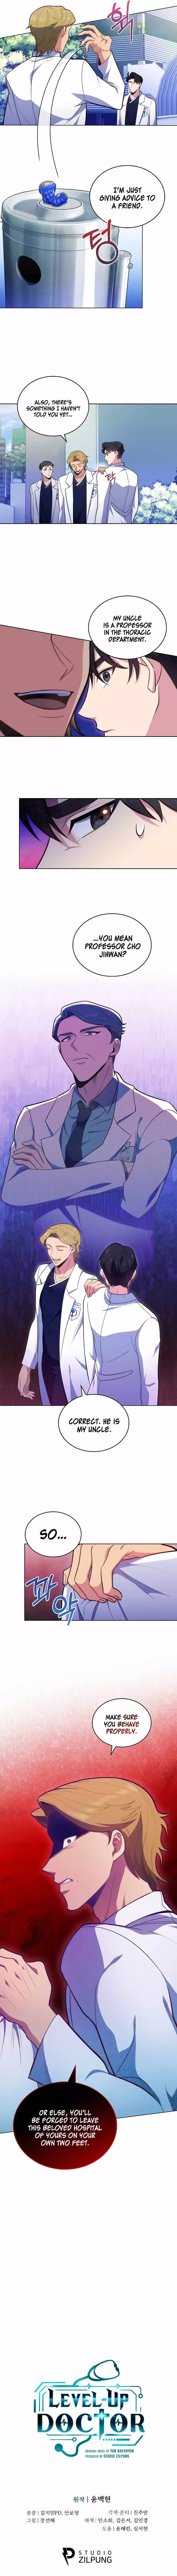 Level-Up Doctor (Manhwa) - 27 page 8-caa941d4